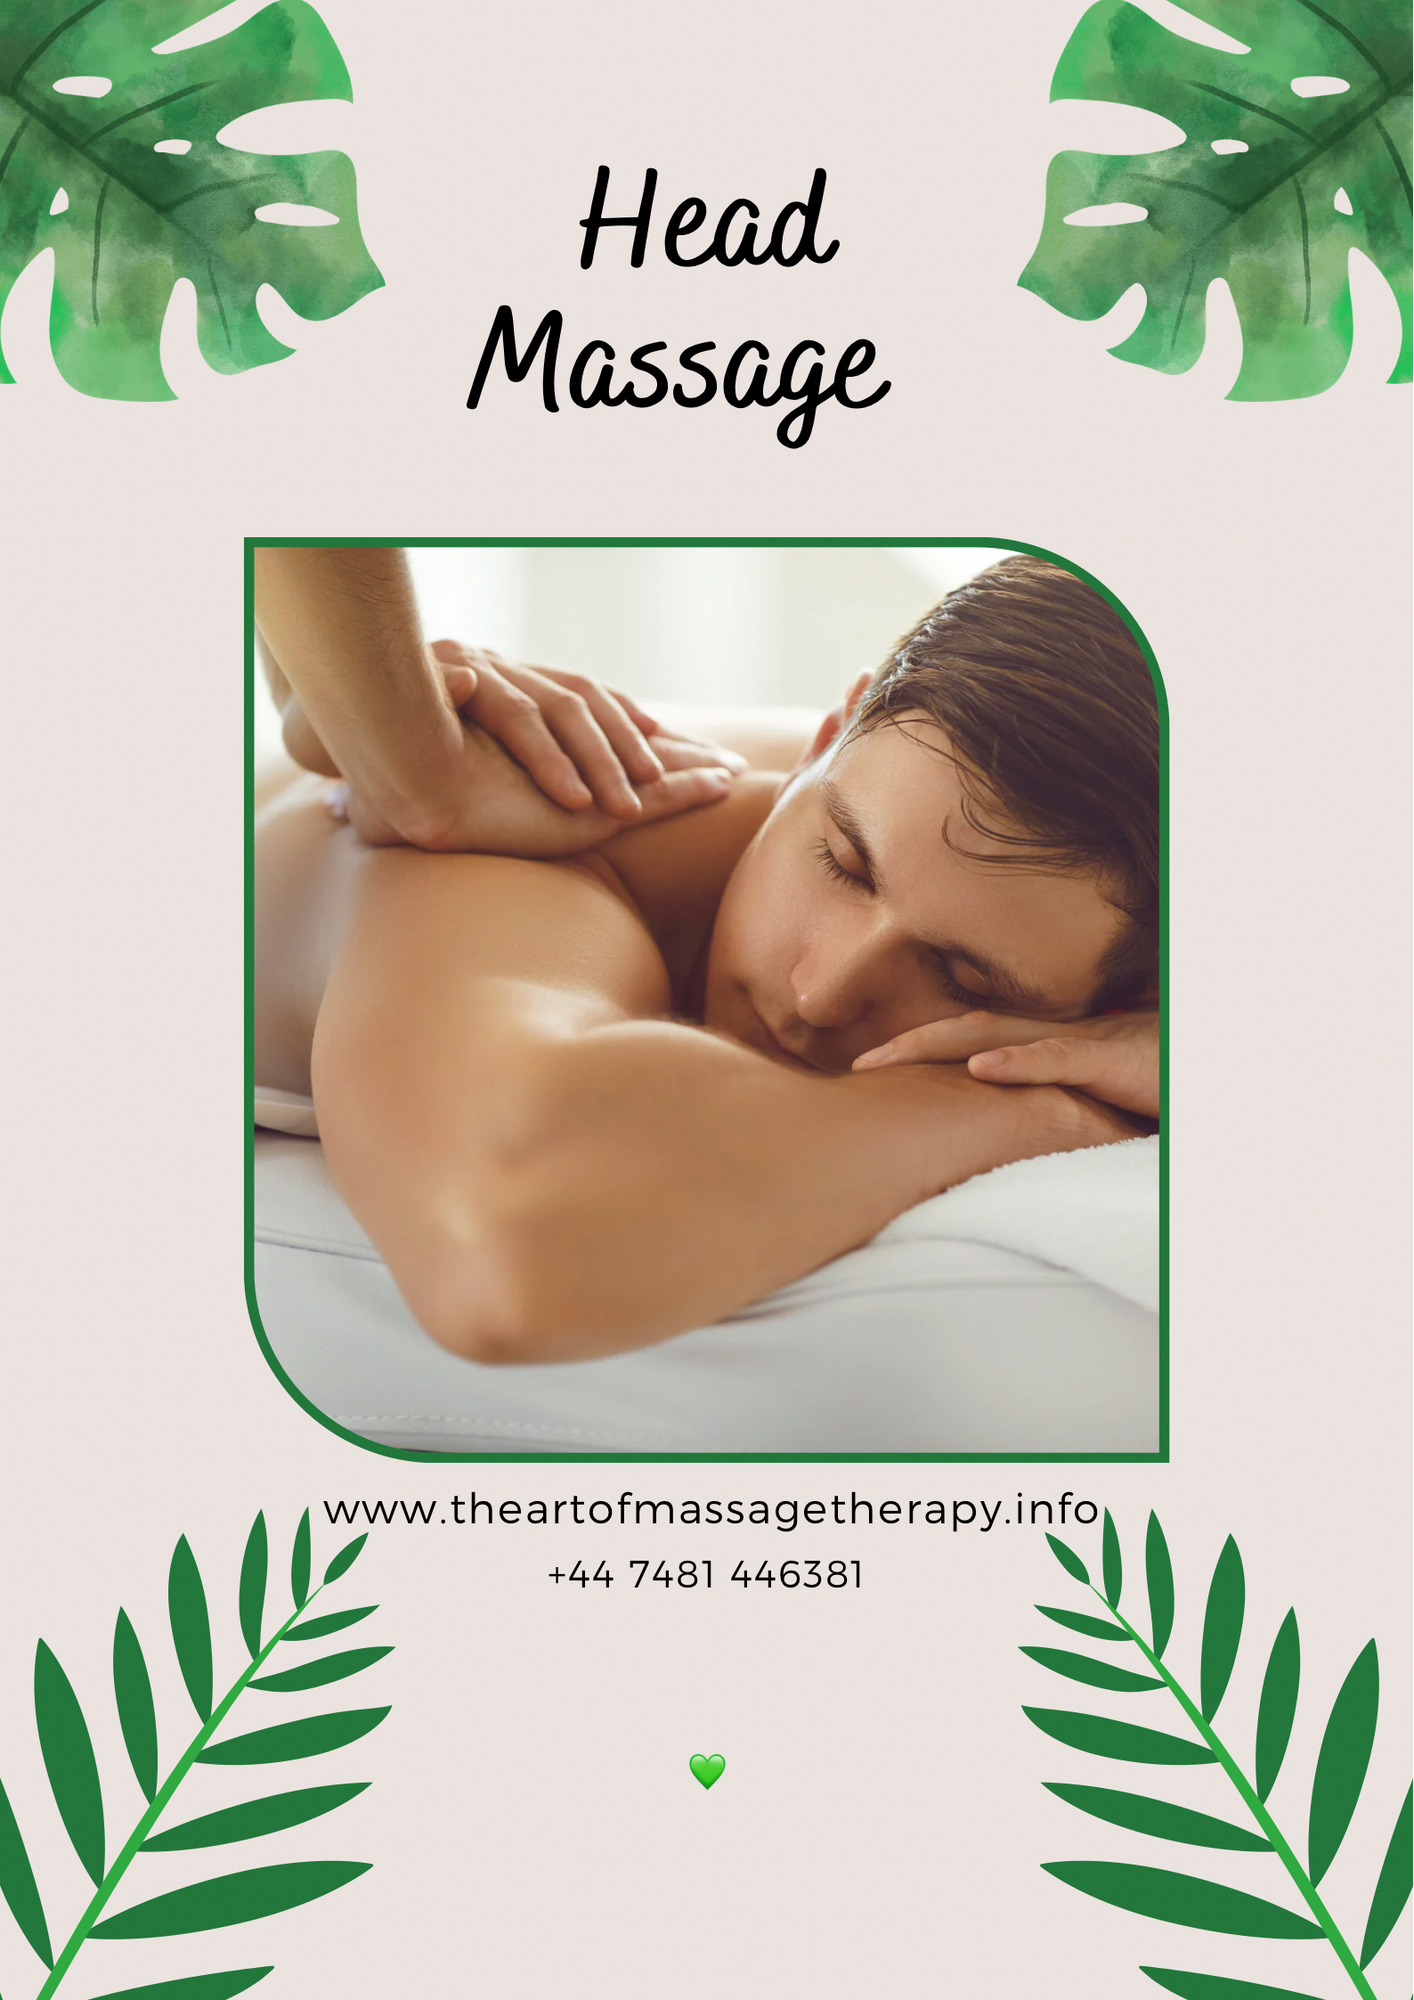 Images The Art of Massage Therapy